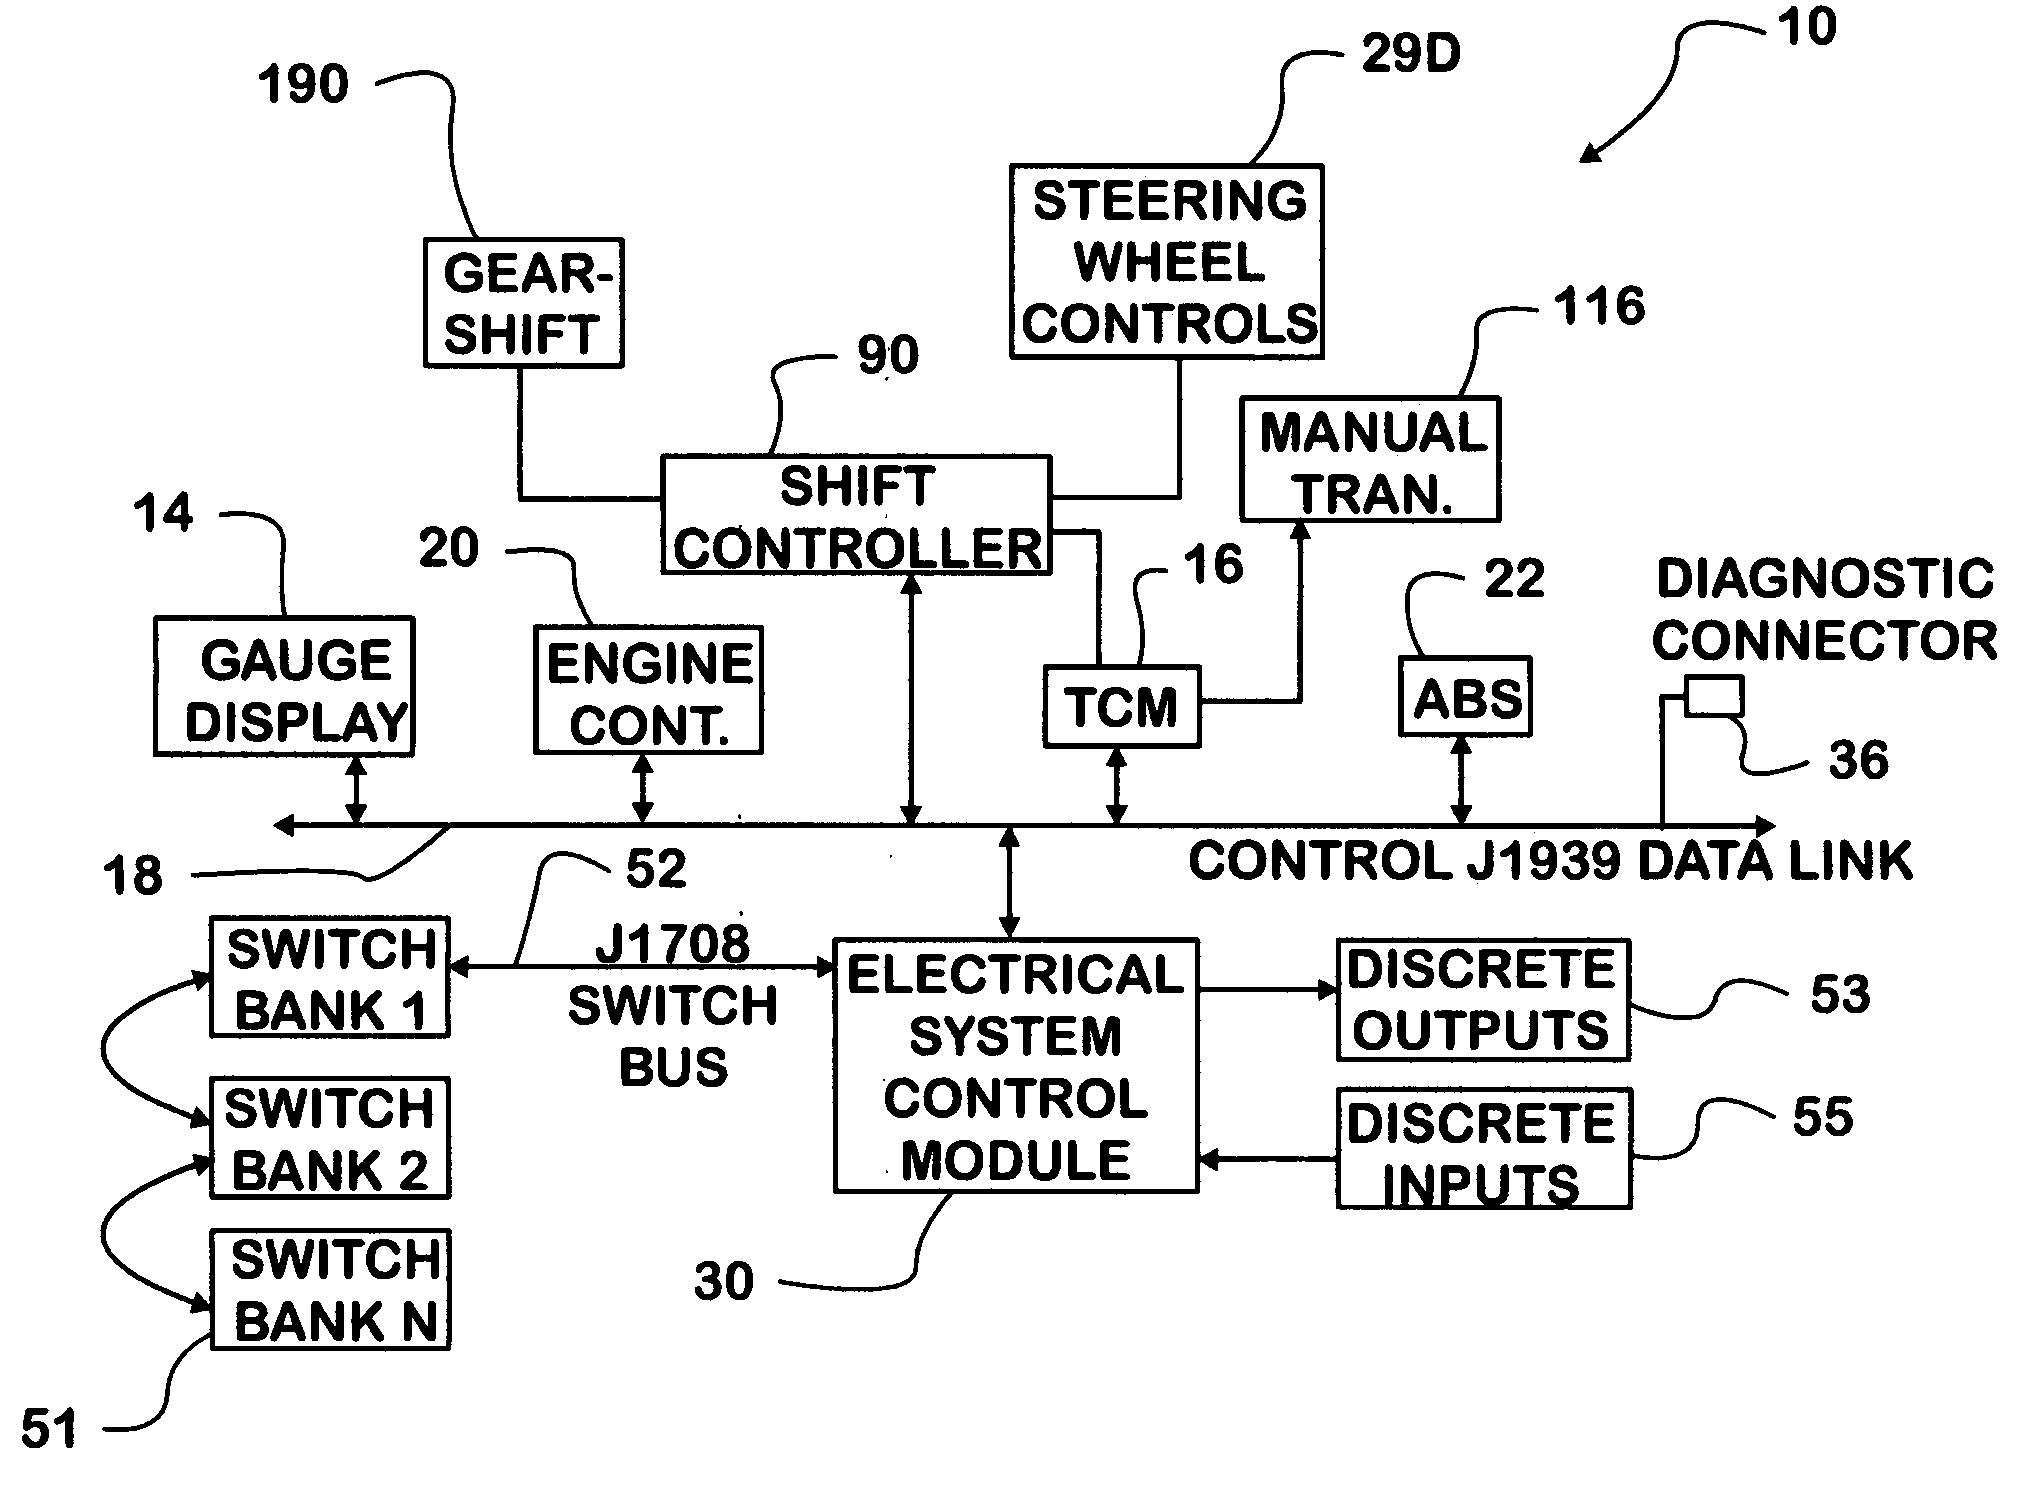 Common control interface for diverse automated manual transmissions